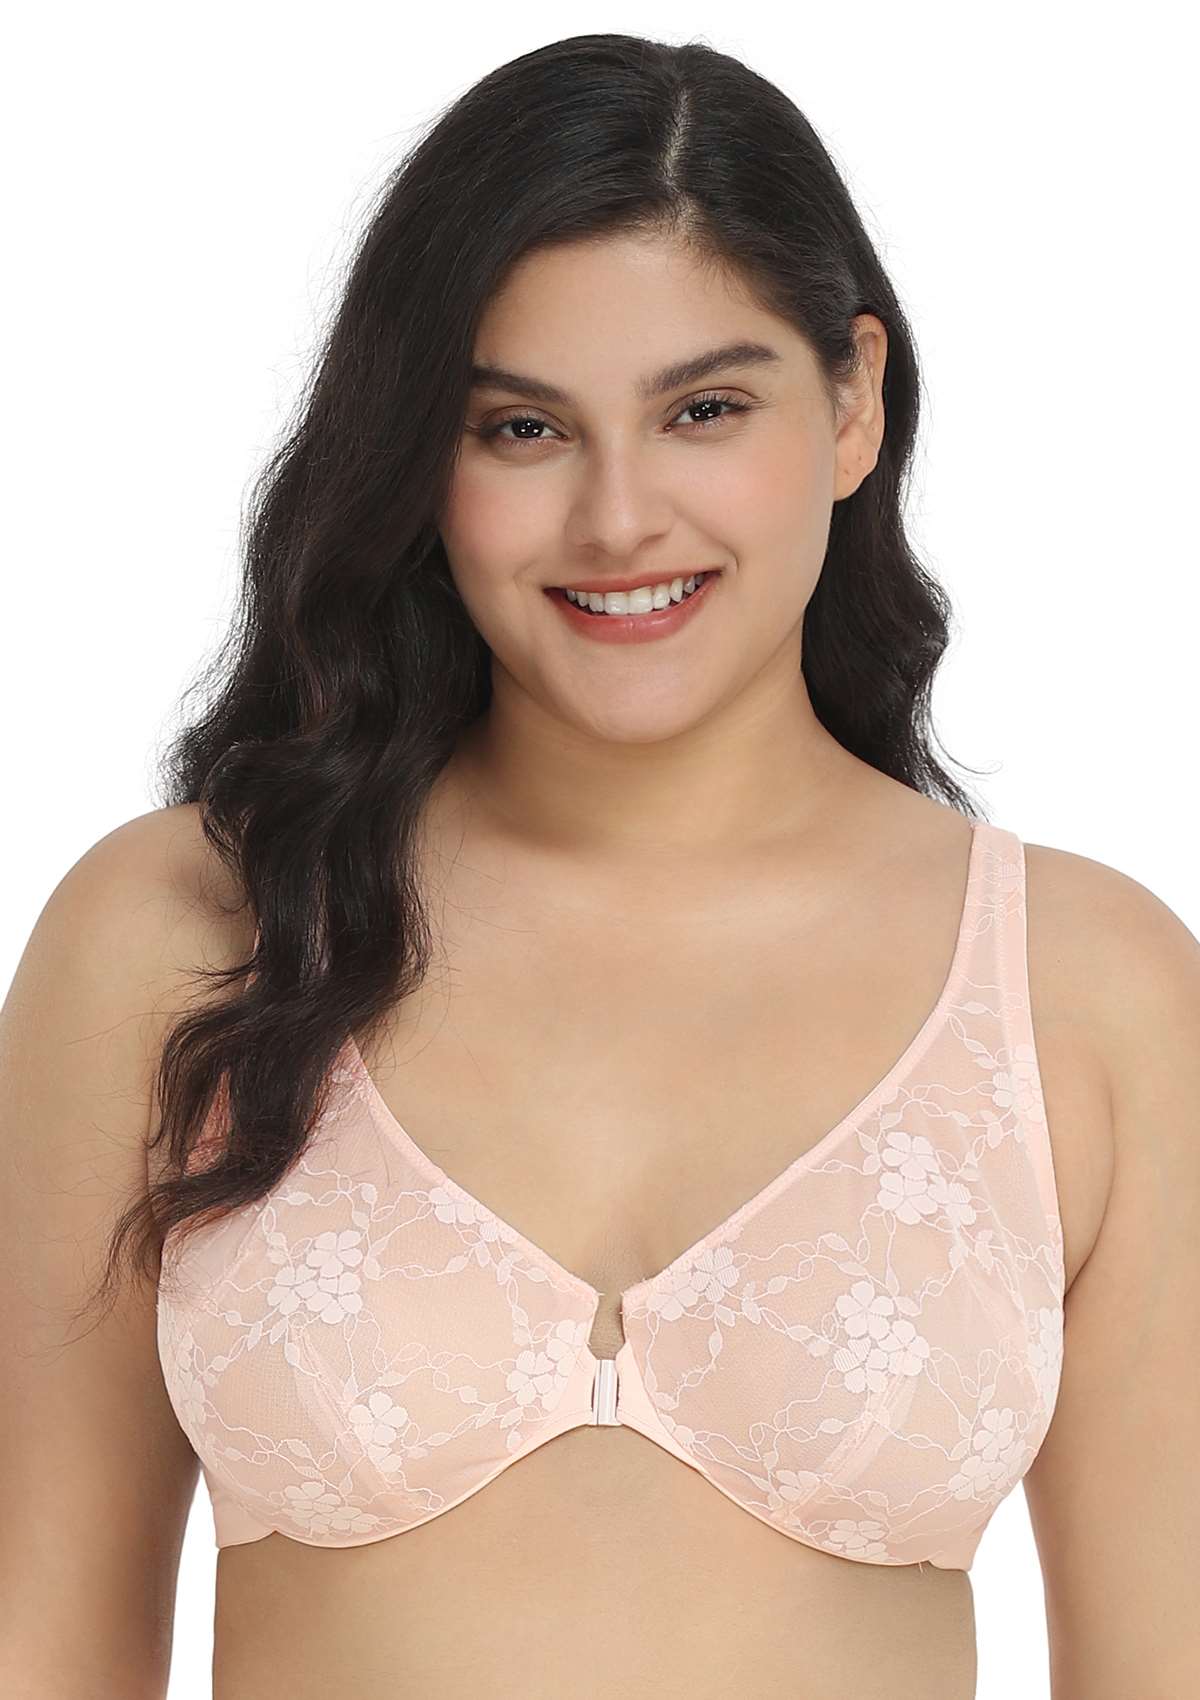 HSIA Spring Romance Front-Close Floral Lace Unlined Full Coverage Bra - White / 36 / I